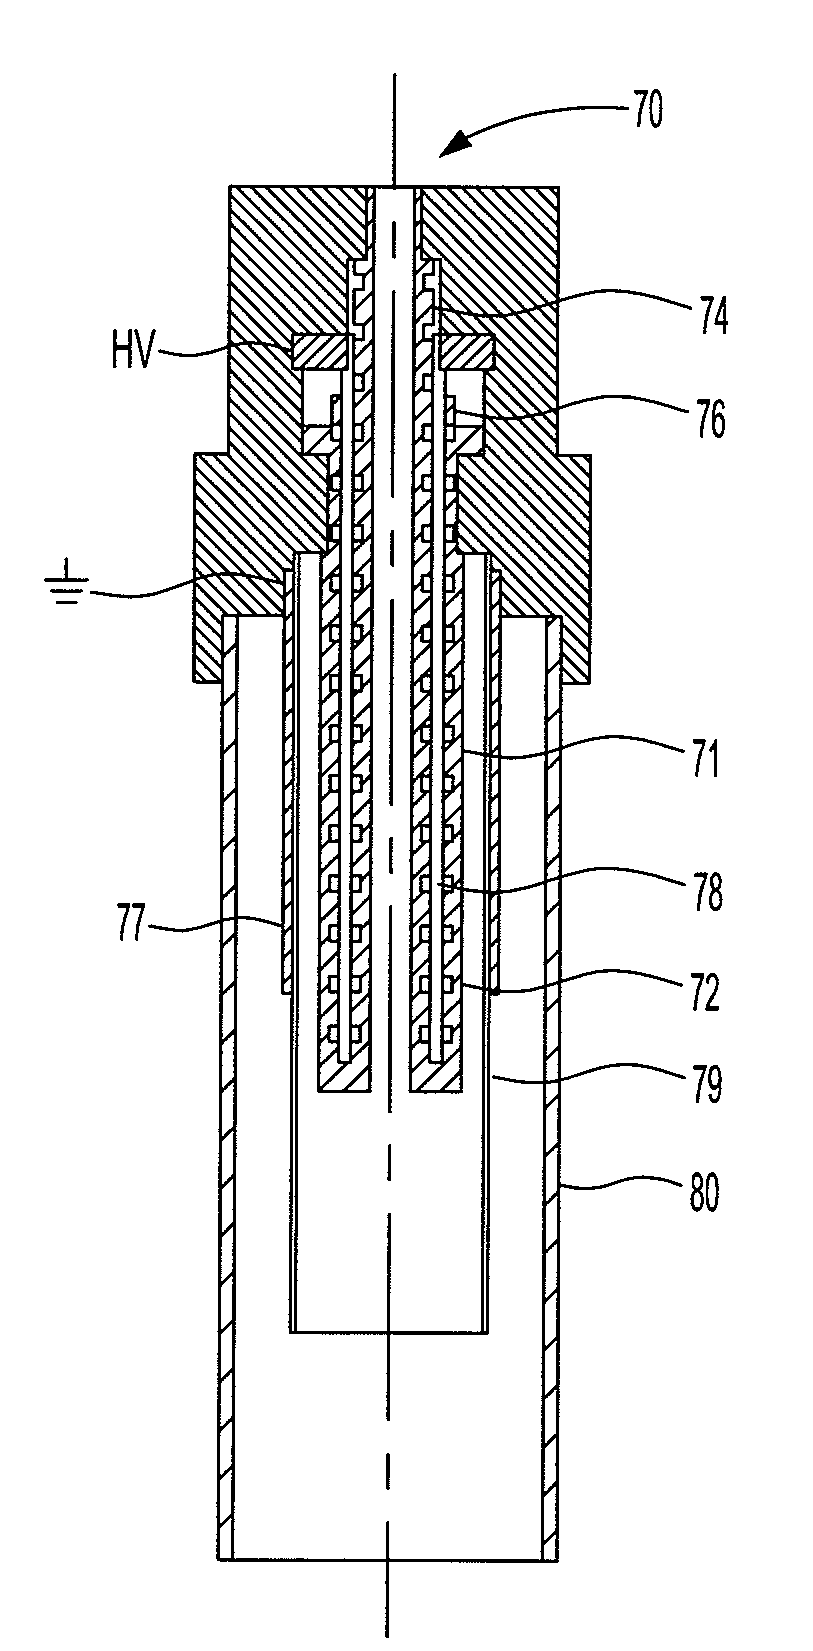 Plasma surface treatment using dielectric barrier discharges